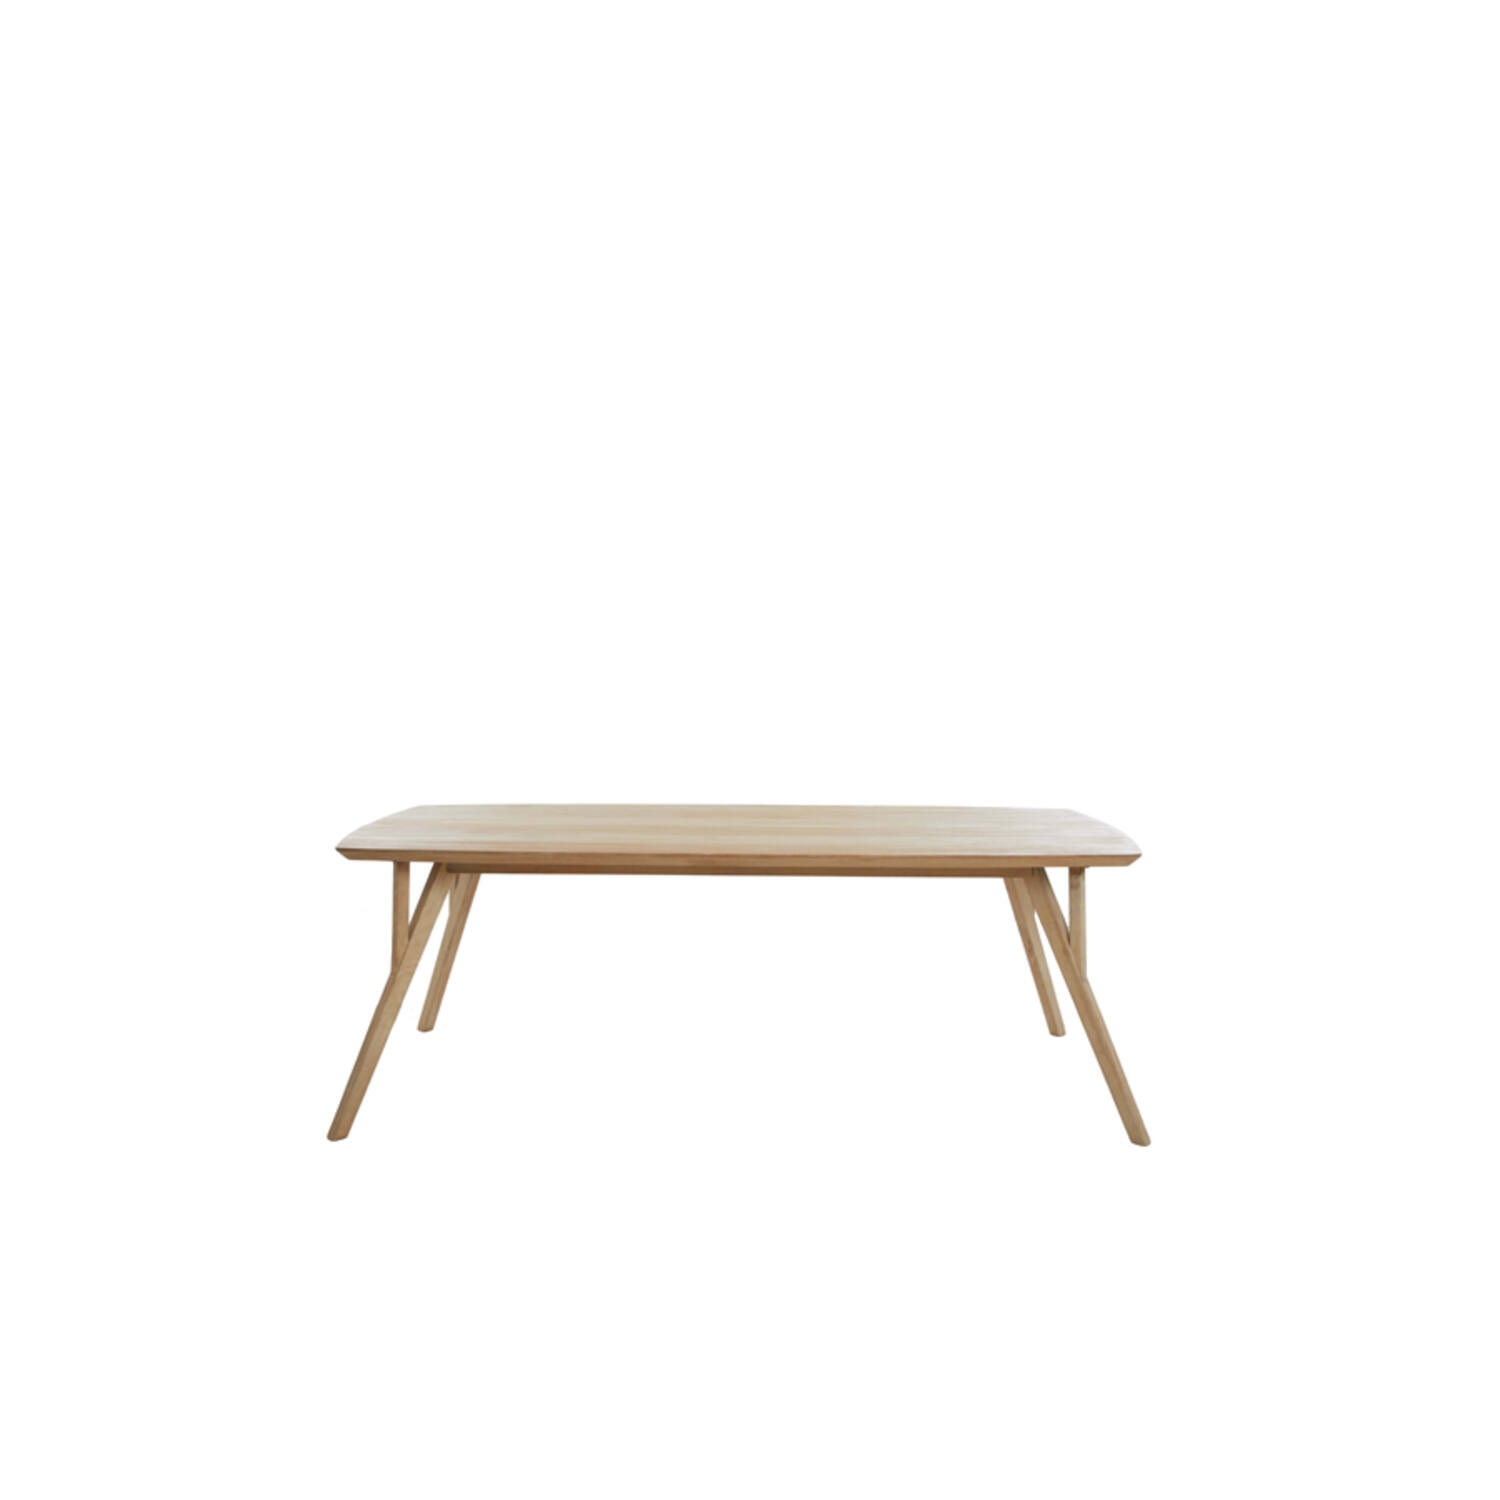 Dining table 220x100x76 cm QUENZA mango wood natural